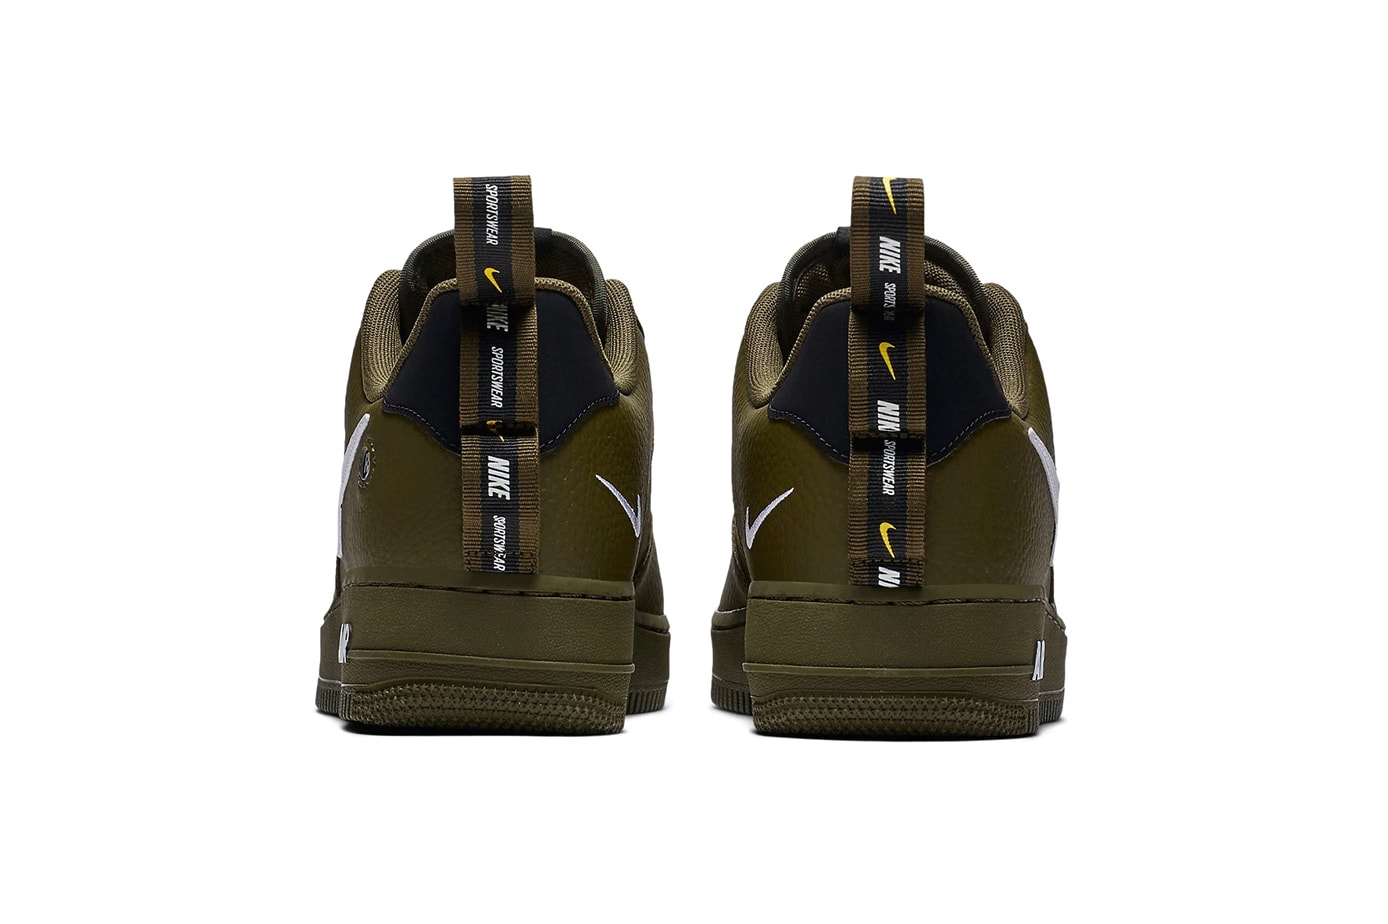 Release Date: Nike Air Force 1 07 LV8 Utility Olive Canvas